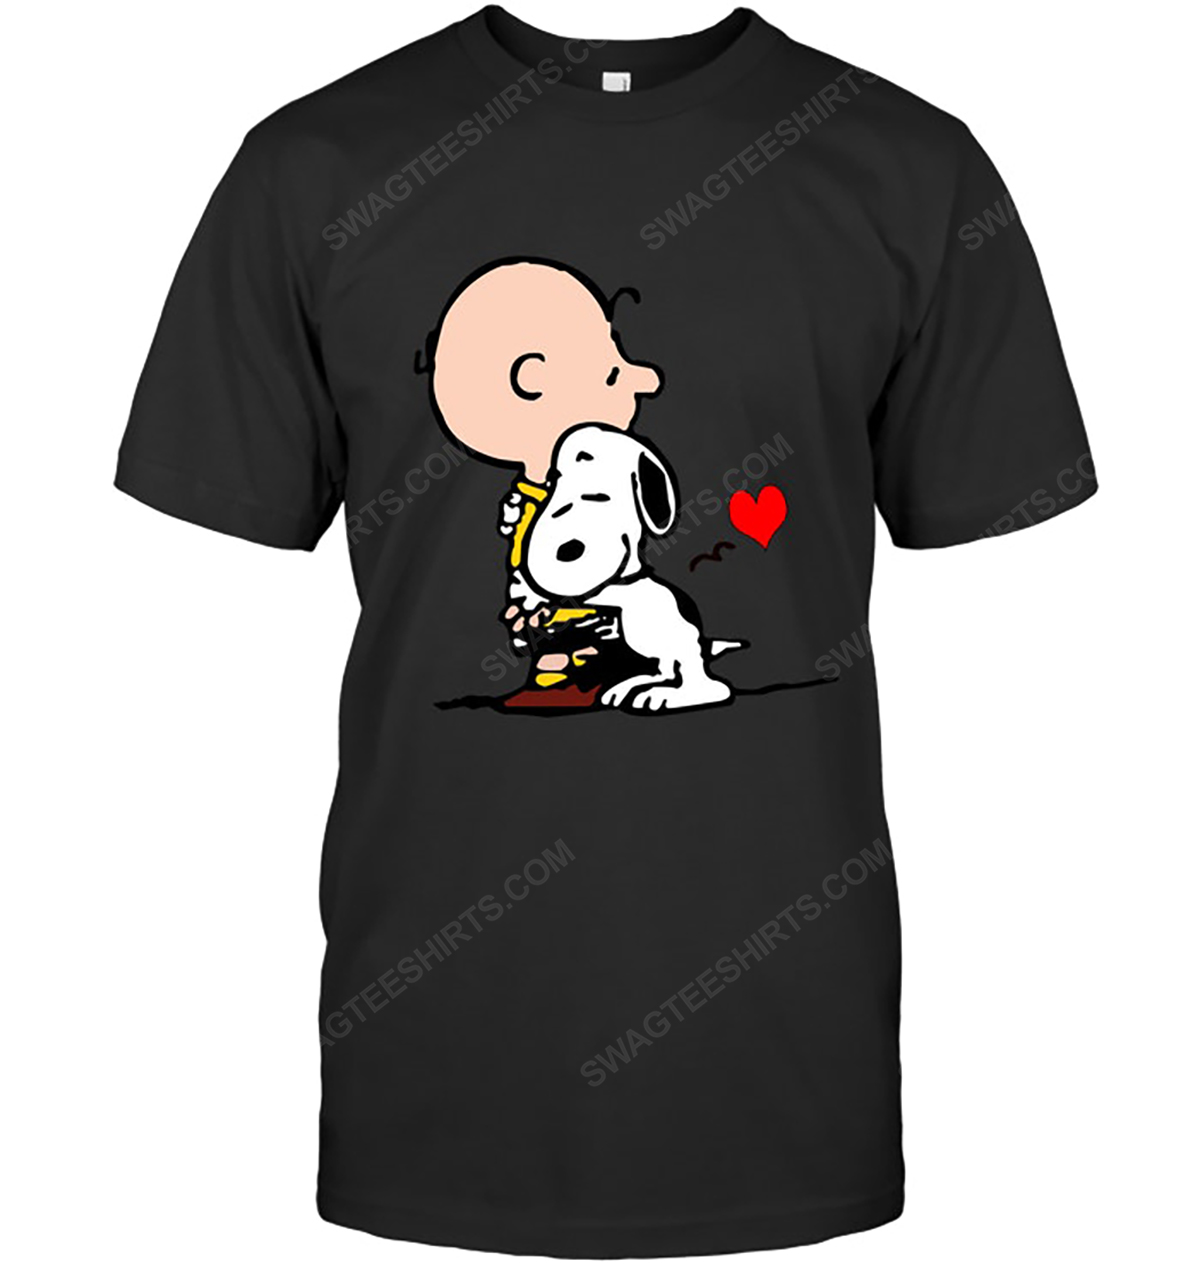 The peanuts snoopy and charlie brown love tshirt 1